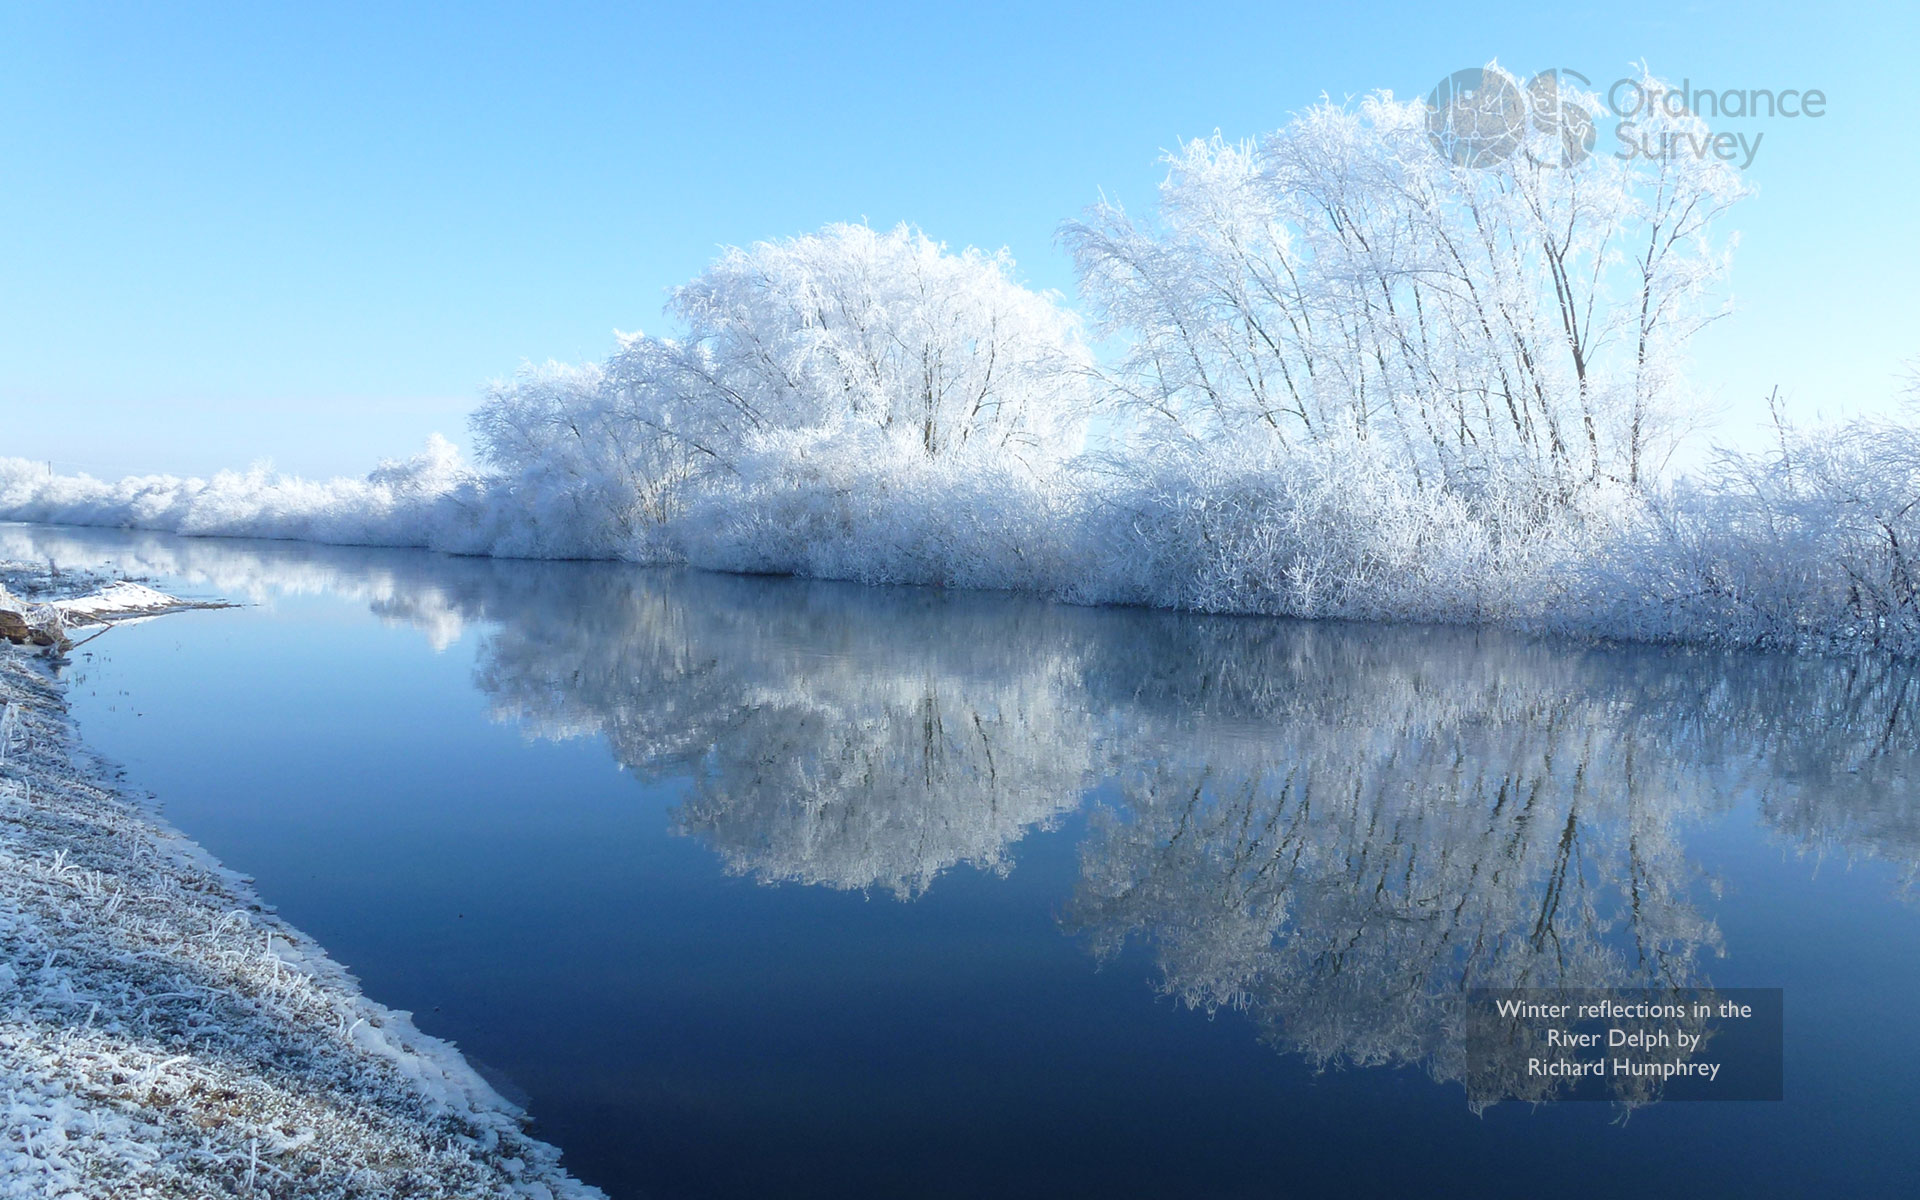 OS Wallpaper Download: January 2020 - Winter reflections in the River Delph  by Richard Humphrey | OS GetOutside